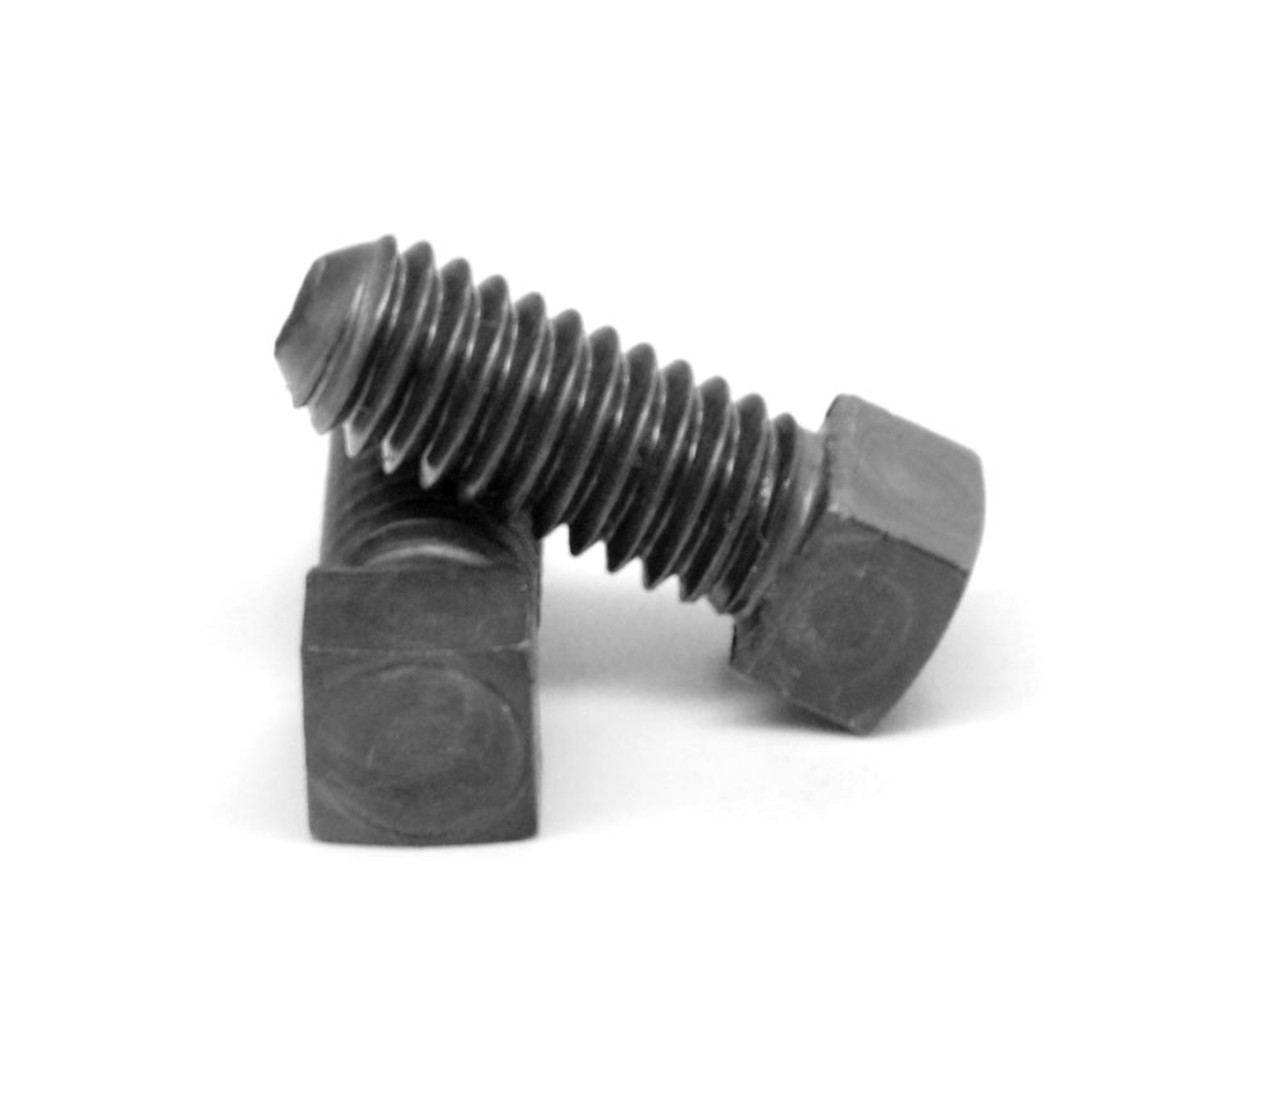 1/2"-13 x 1 1/2" (FT) Coarse Thread Square Head Set Screw Oval Point Low Carbon Steel Case Hardened Plain Finish